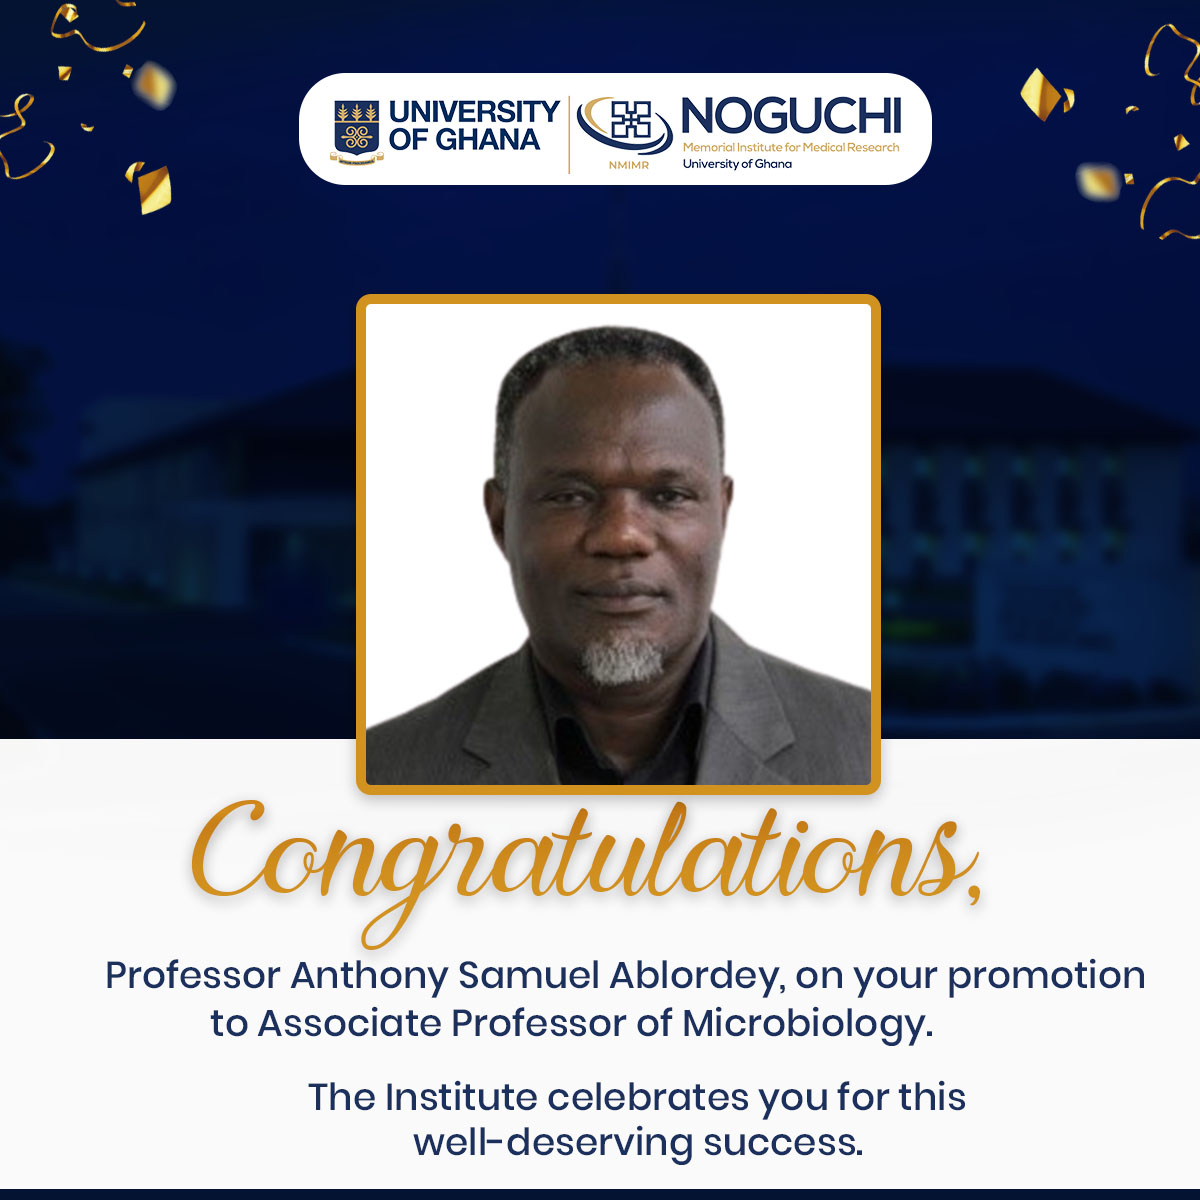 Congratulations, Prof. Anthony Samuel Ablordey, Head, Department of Bacteriology, @NoguchiBact, @NMIMR_UG, on your promotion to Associate Professor of Microbiology. The Institute is proud of your achievement 👏👏